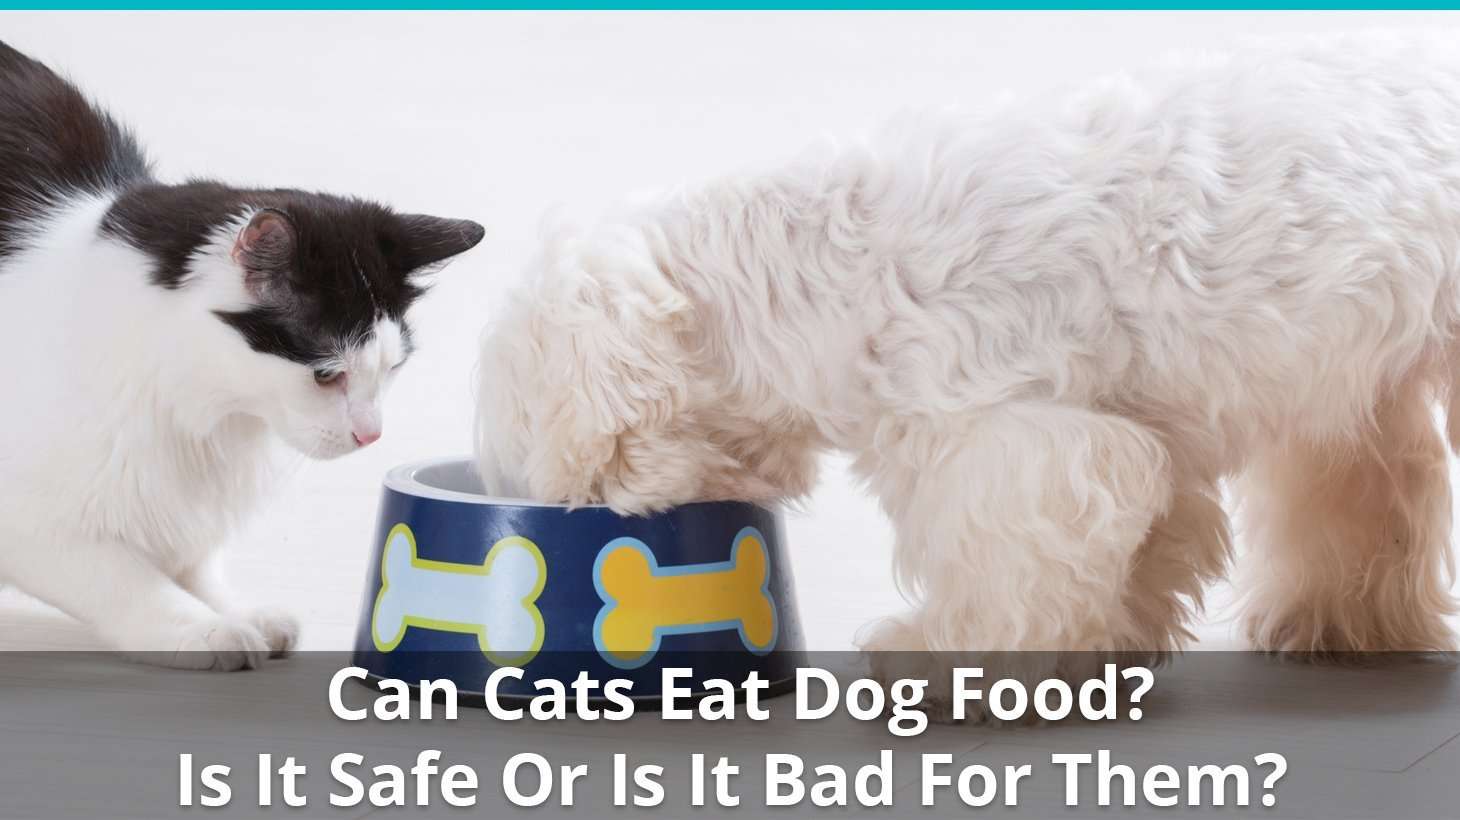 Can Cats Eat Dog Food? Is It Safe or Bad For Them?